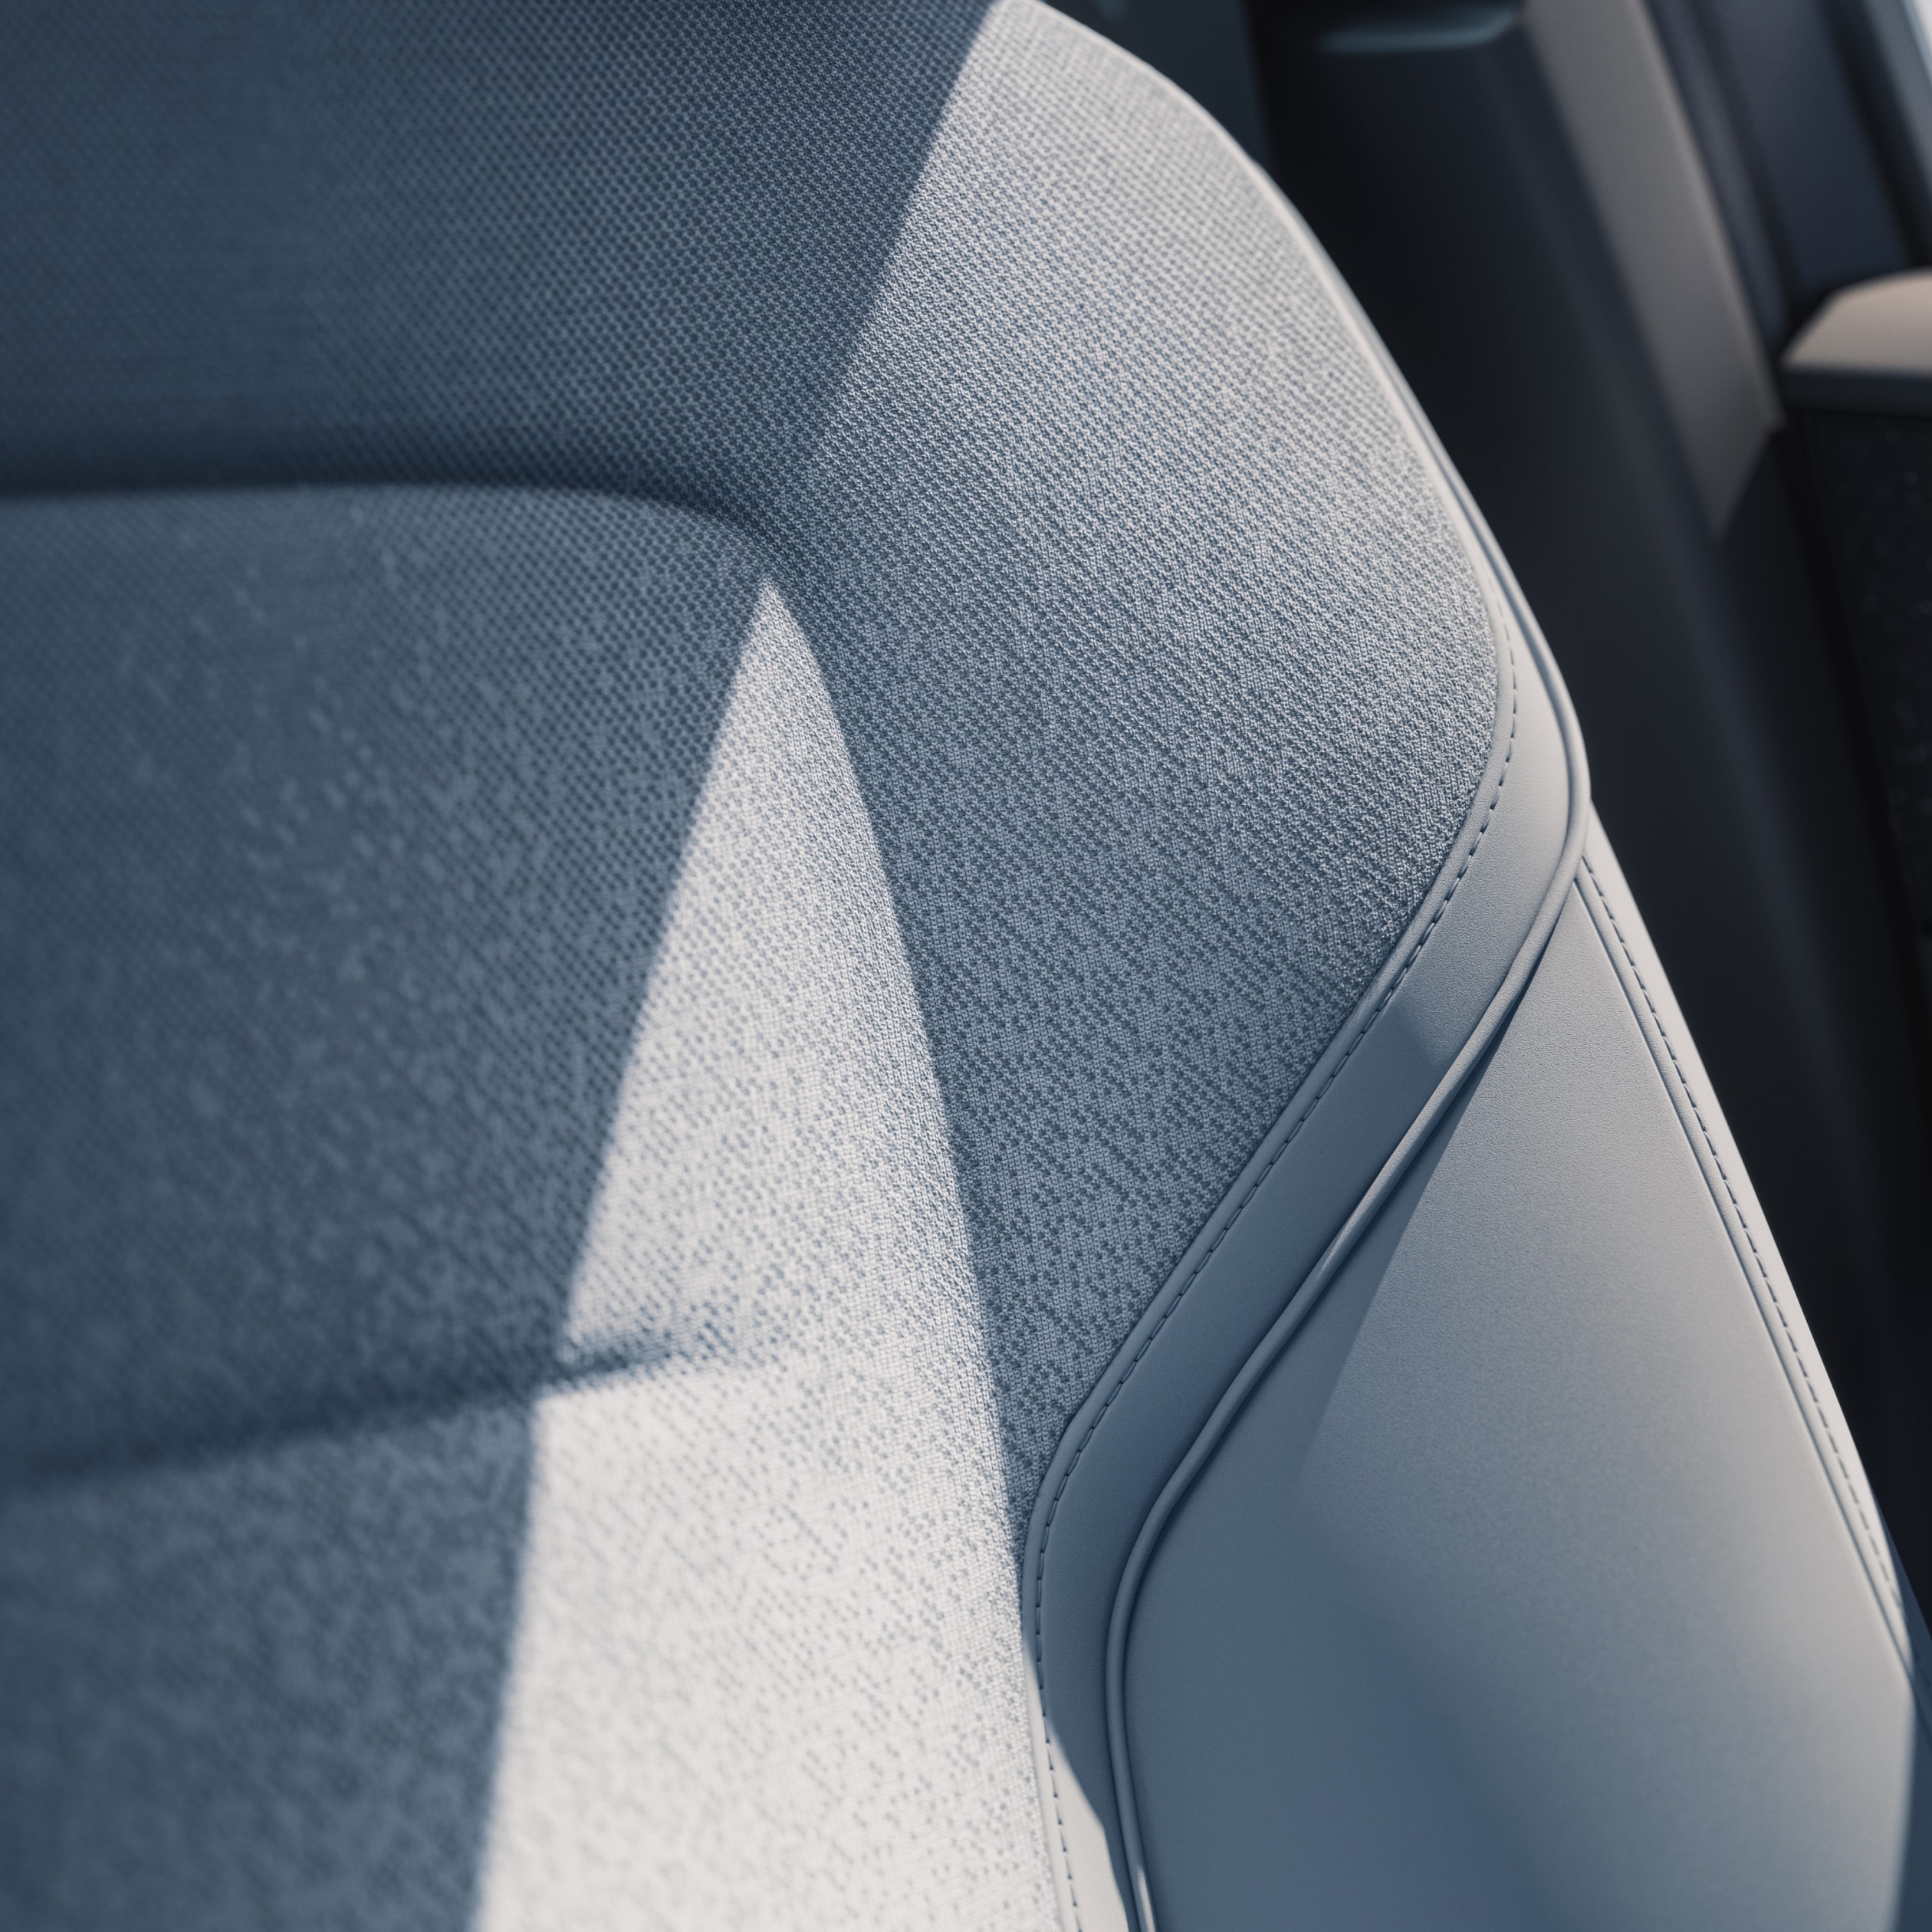 Structured Pixel Knit adds a technical feel to the Breeze interior.